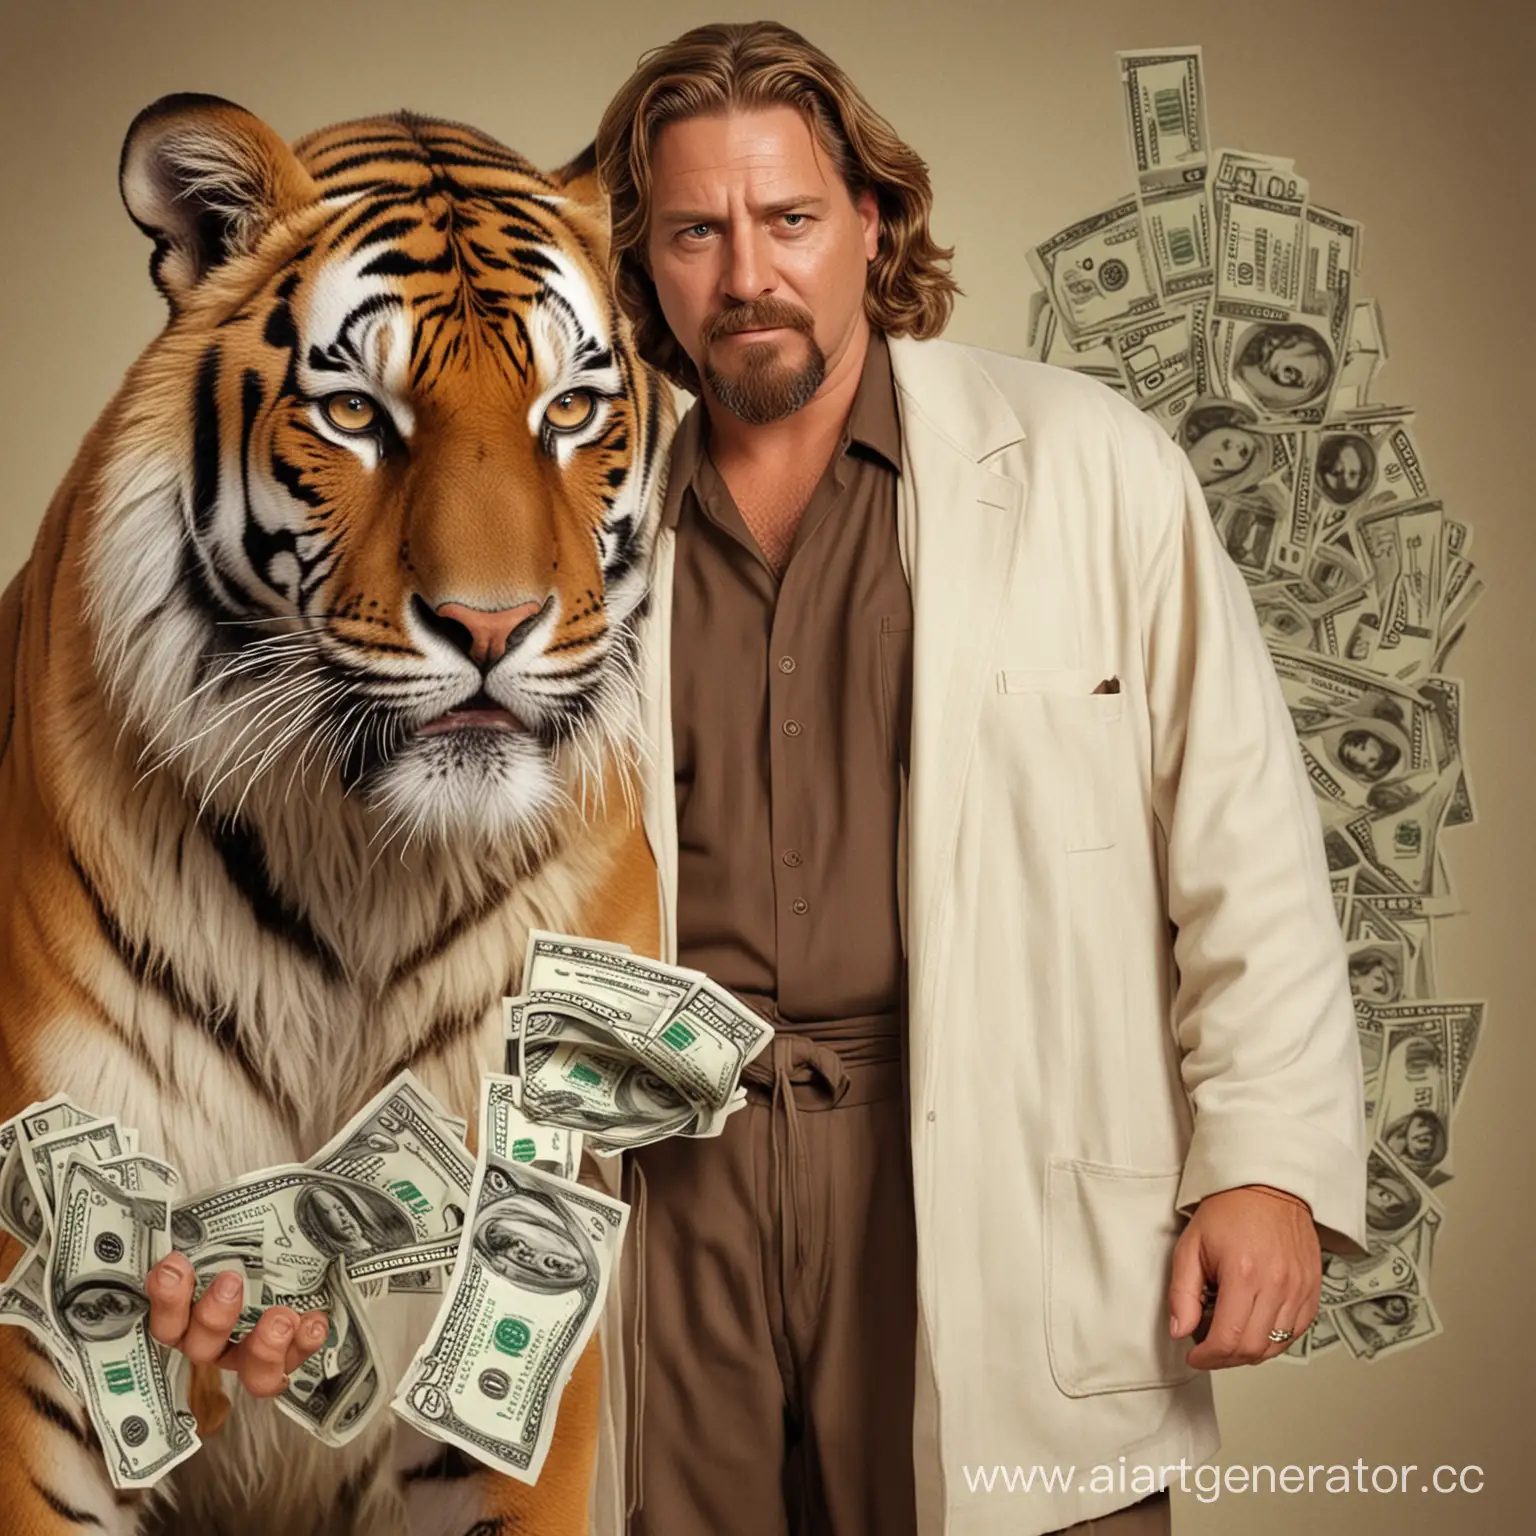 Jeff-Bridges-as-The-Big-Lebowski-with-Tiger-and-Cash